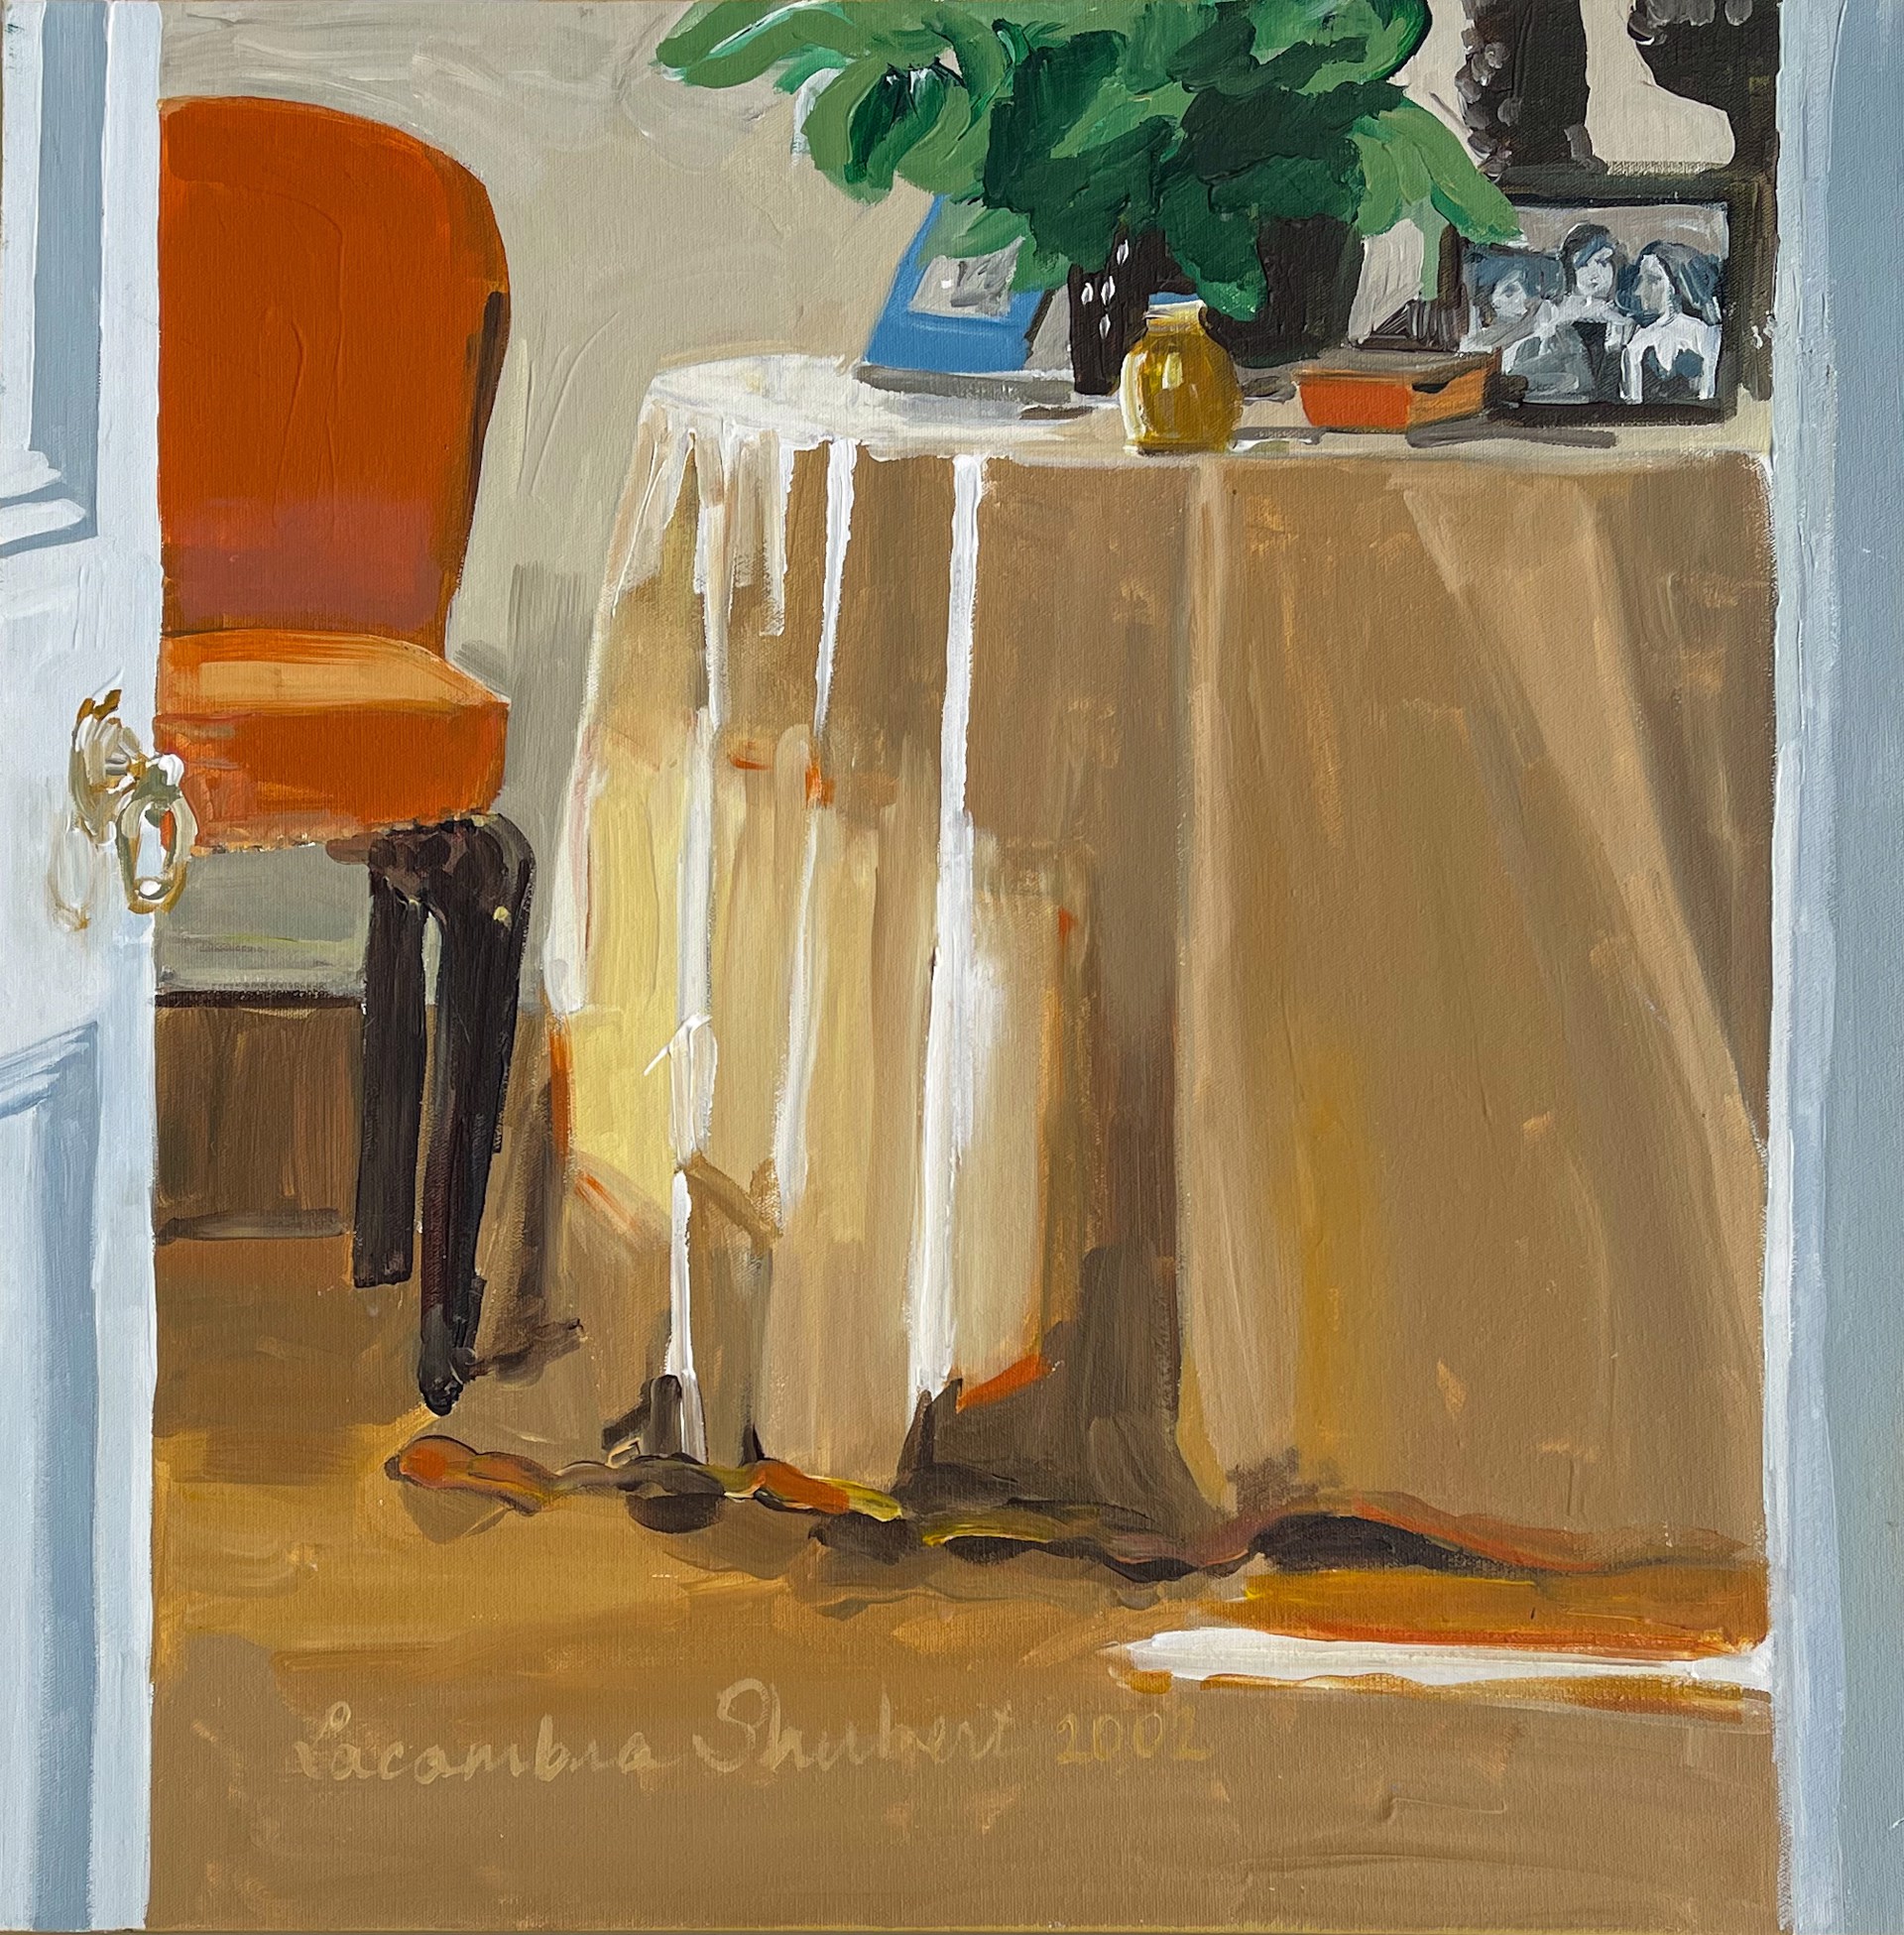 Sitting Room with Orange Chair by Laura Lacambra Shubert